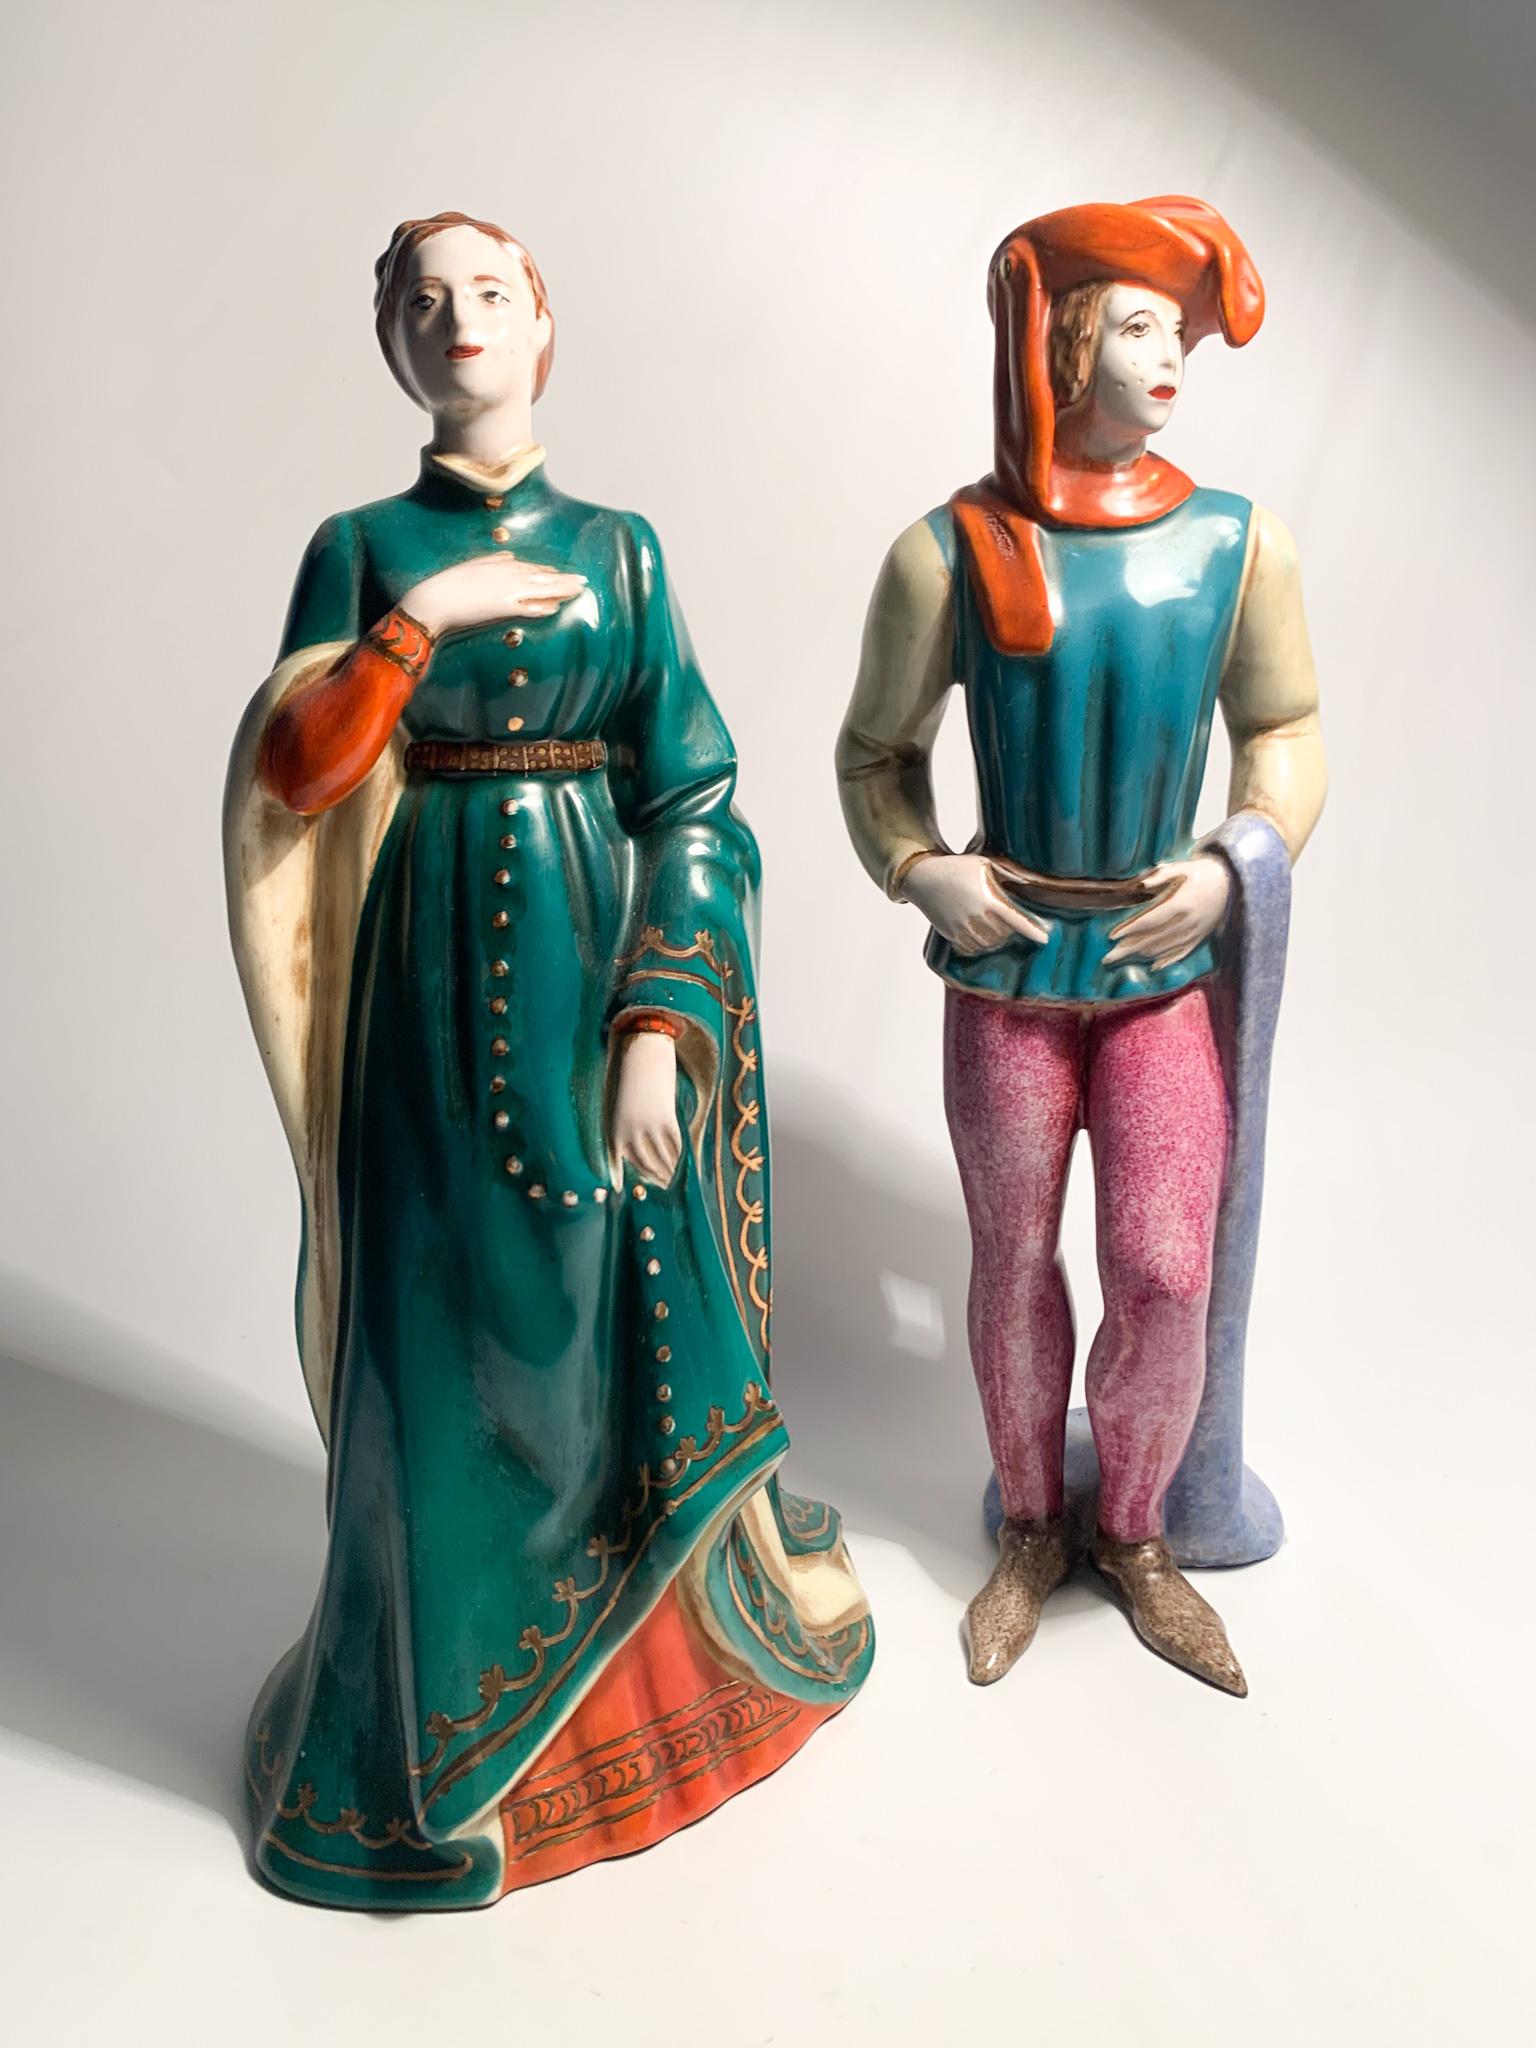 Pair of ceramic figurines depicting a lady and a gentleman, made by Zaccagninini in the 1940s

Checkers - Ø cm 17 h cm 32

Gentleman - Ø cm 7 h cm 32